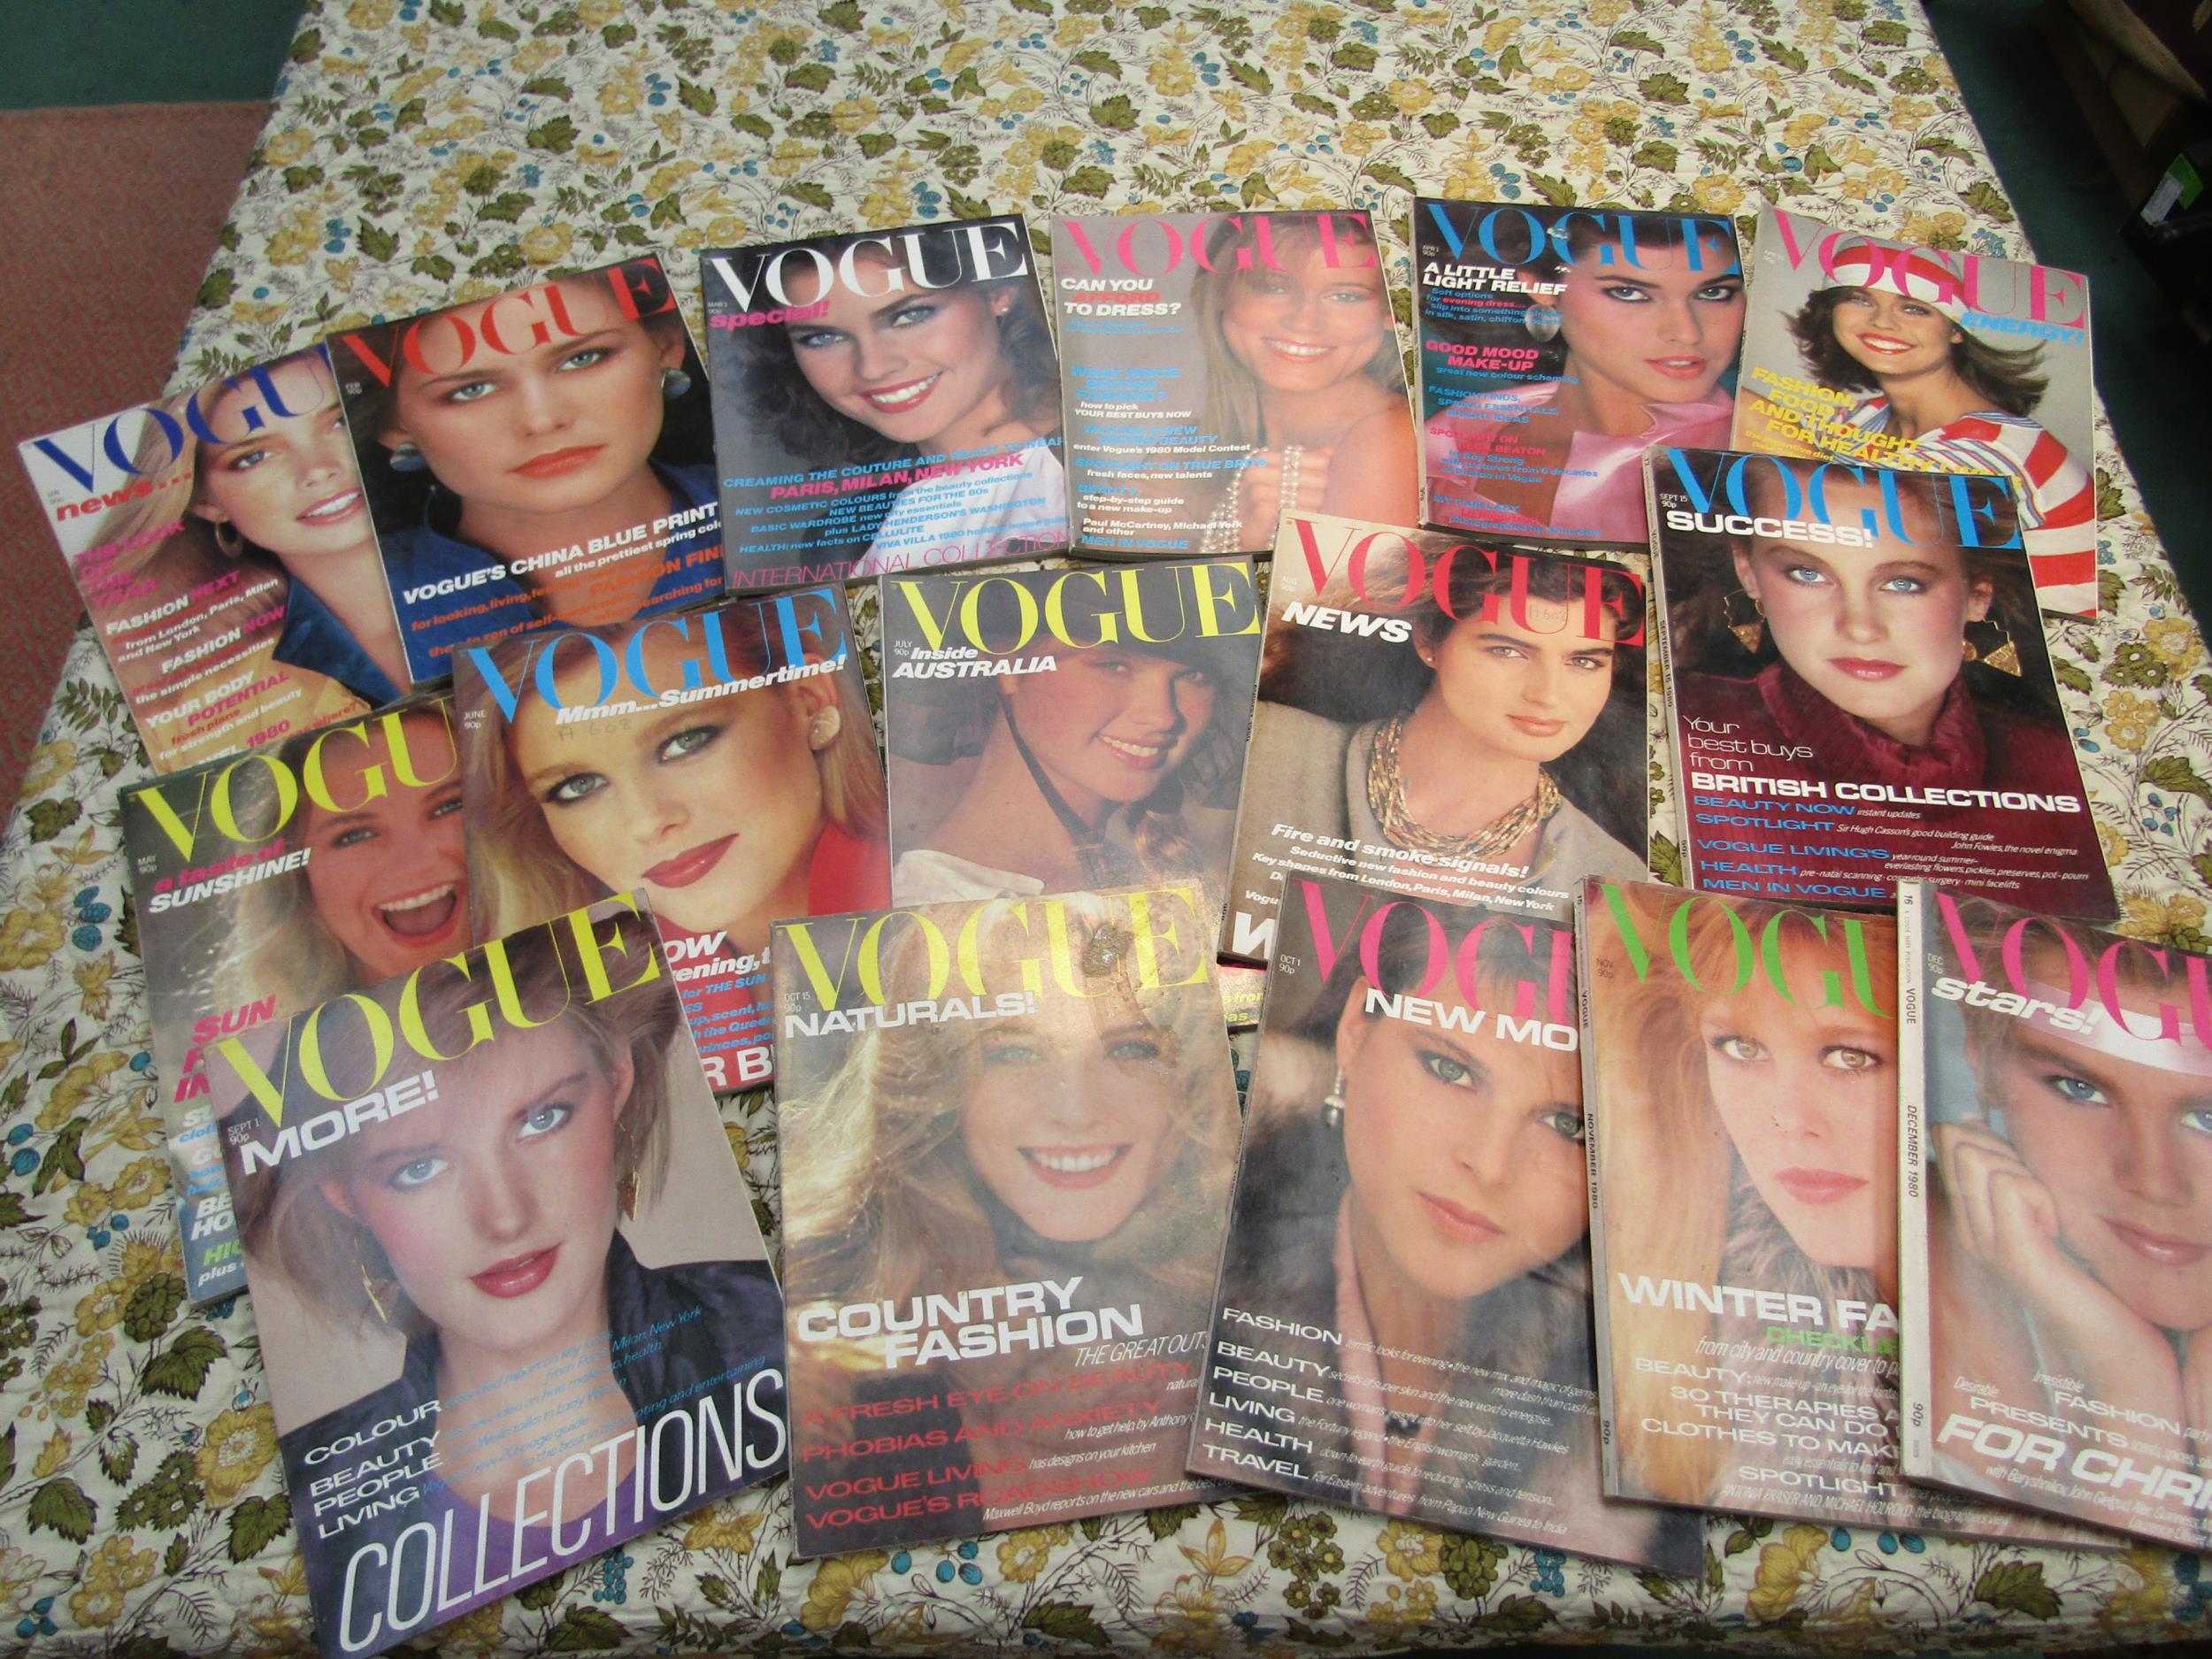 British Vogue magazine 1980 - January (1), February (2), March 1st (3), March 15th (4), April 1st ( - Image 40 of 40